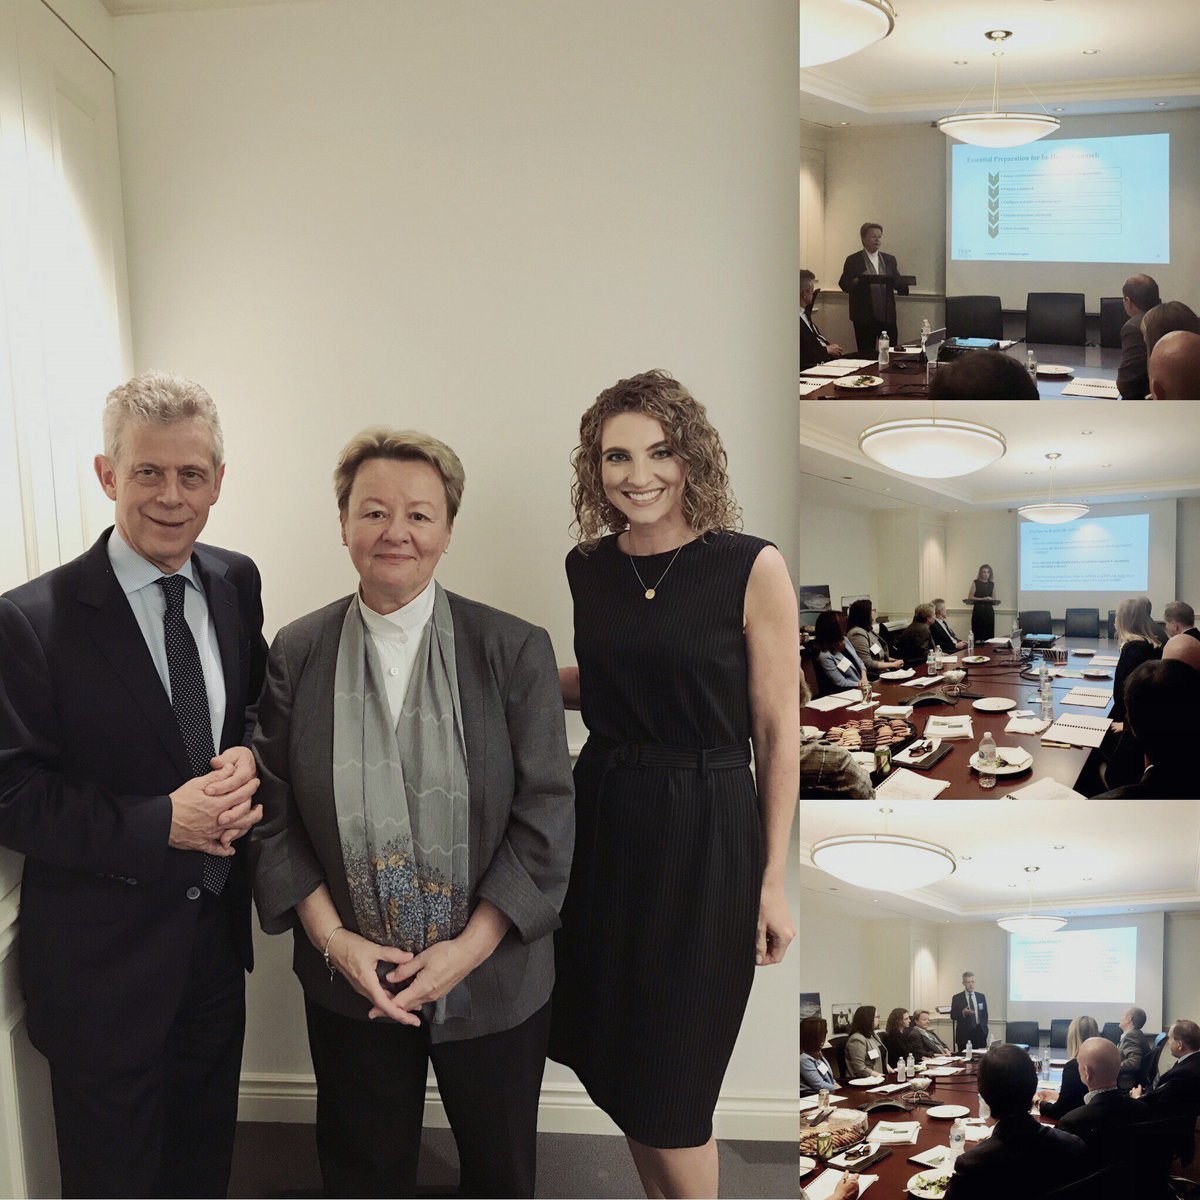 Today, DWW Lawyers Richard Austin, Amy-Lynne Williams and Jennifer Davidson educated in-house counsel on essential preparatory measures for a Data Breach. Are you prepared?

#databreach #databreachresponse #cyberbreach #cybersecurity #ITLaw #databreachinCanada #toptech #techlaw